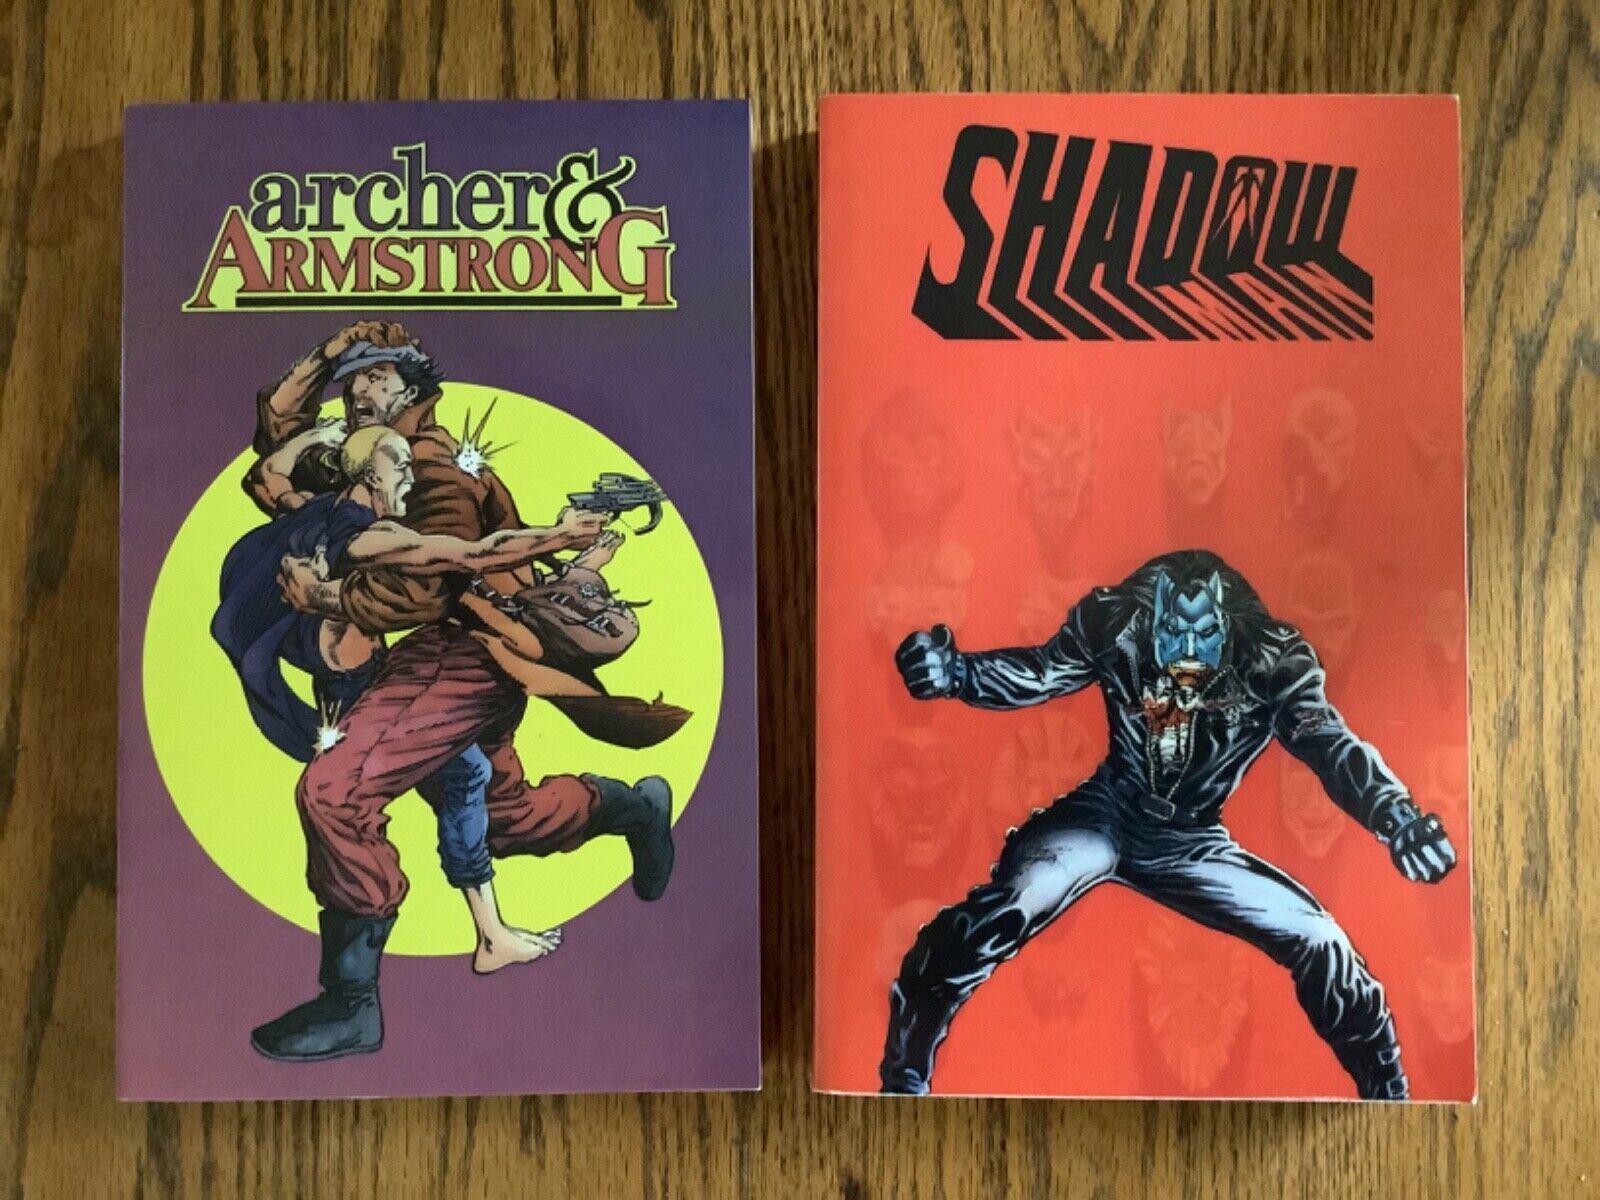 ARCHER & ARMSTRONG #0-8 + SHADOWMAN #1-18 Custom Softcover Bound Books VALIANT